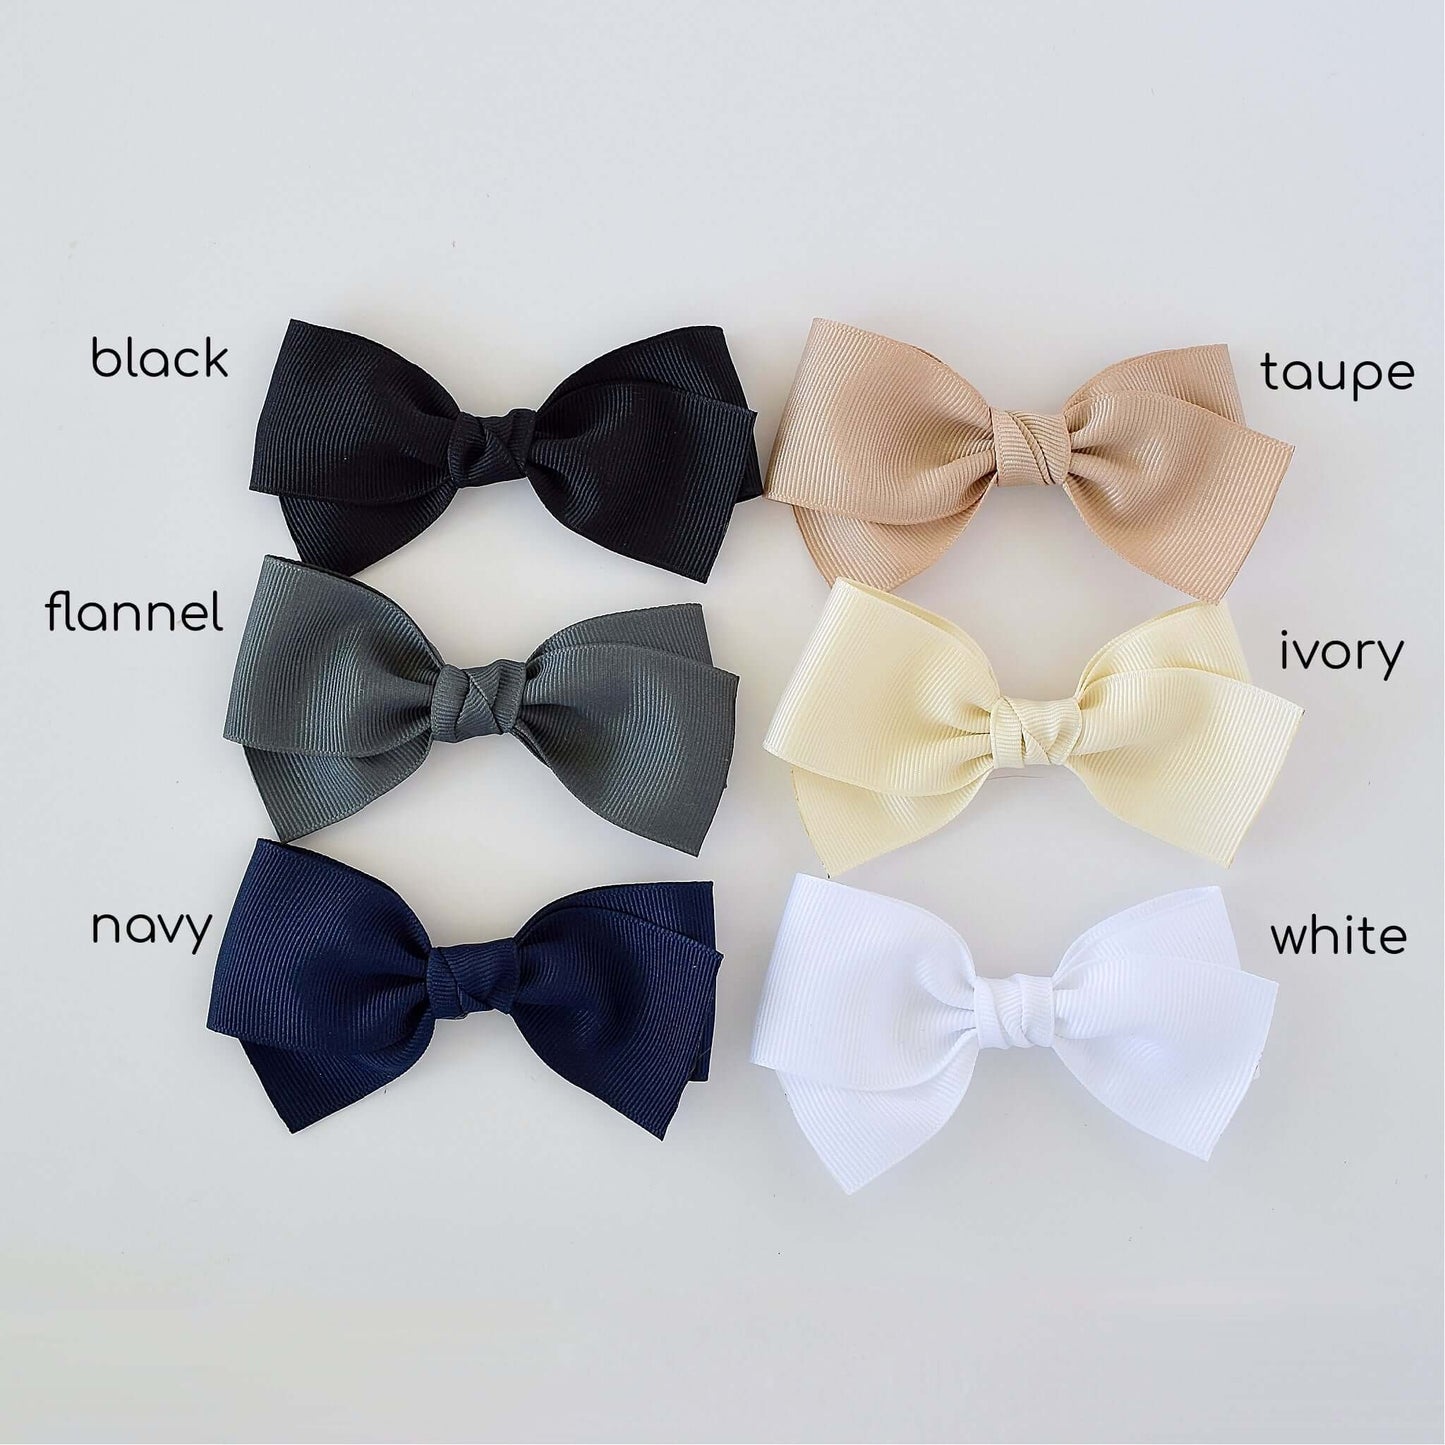 4 inch grosgrain baby Kayla bow clips and headbands in black, taupe, flannel, ivory, navy, and white colors displayed.